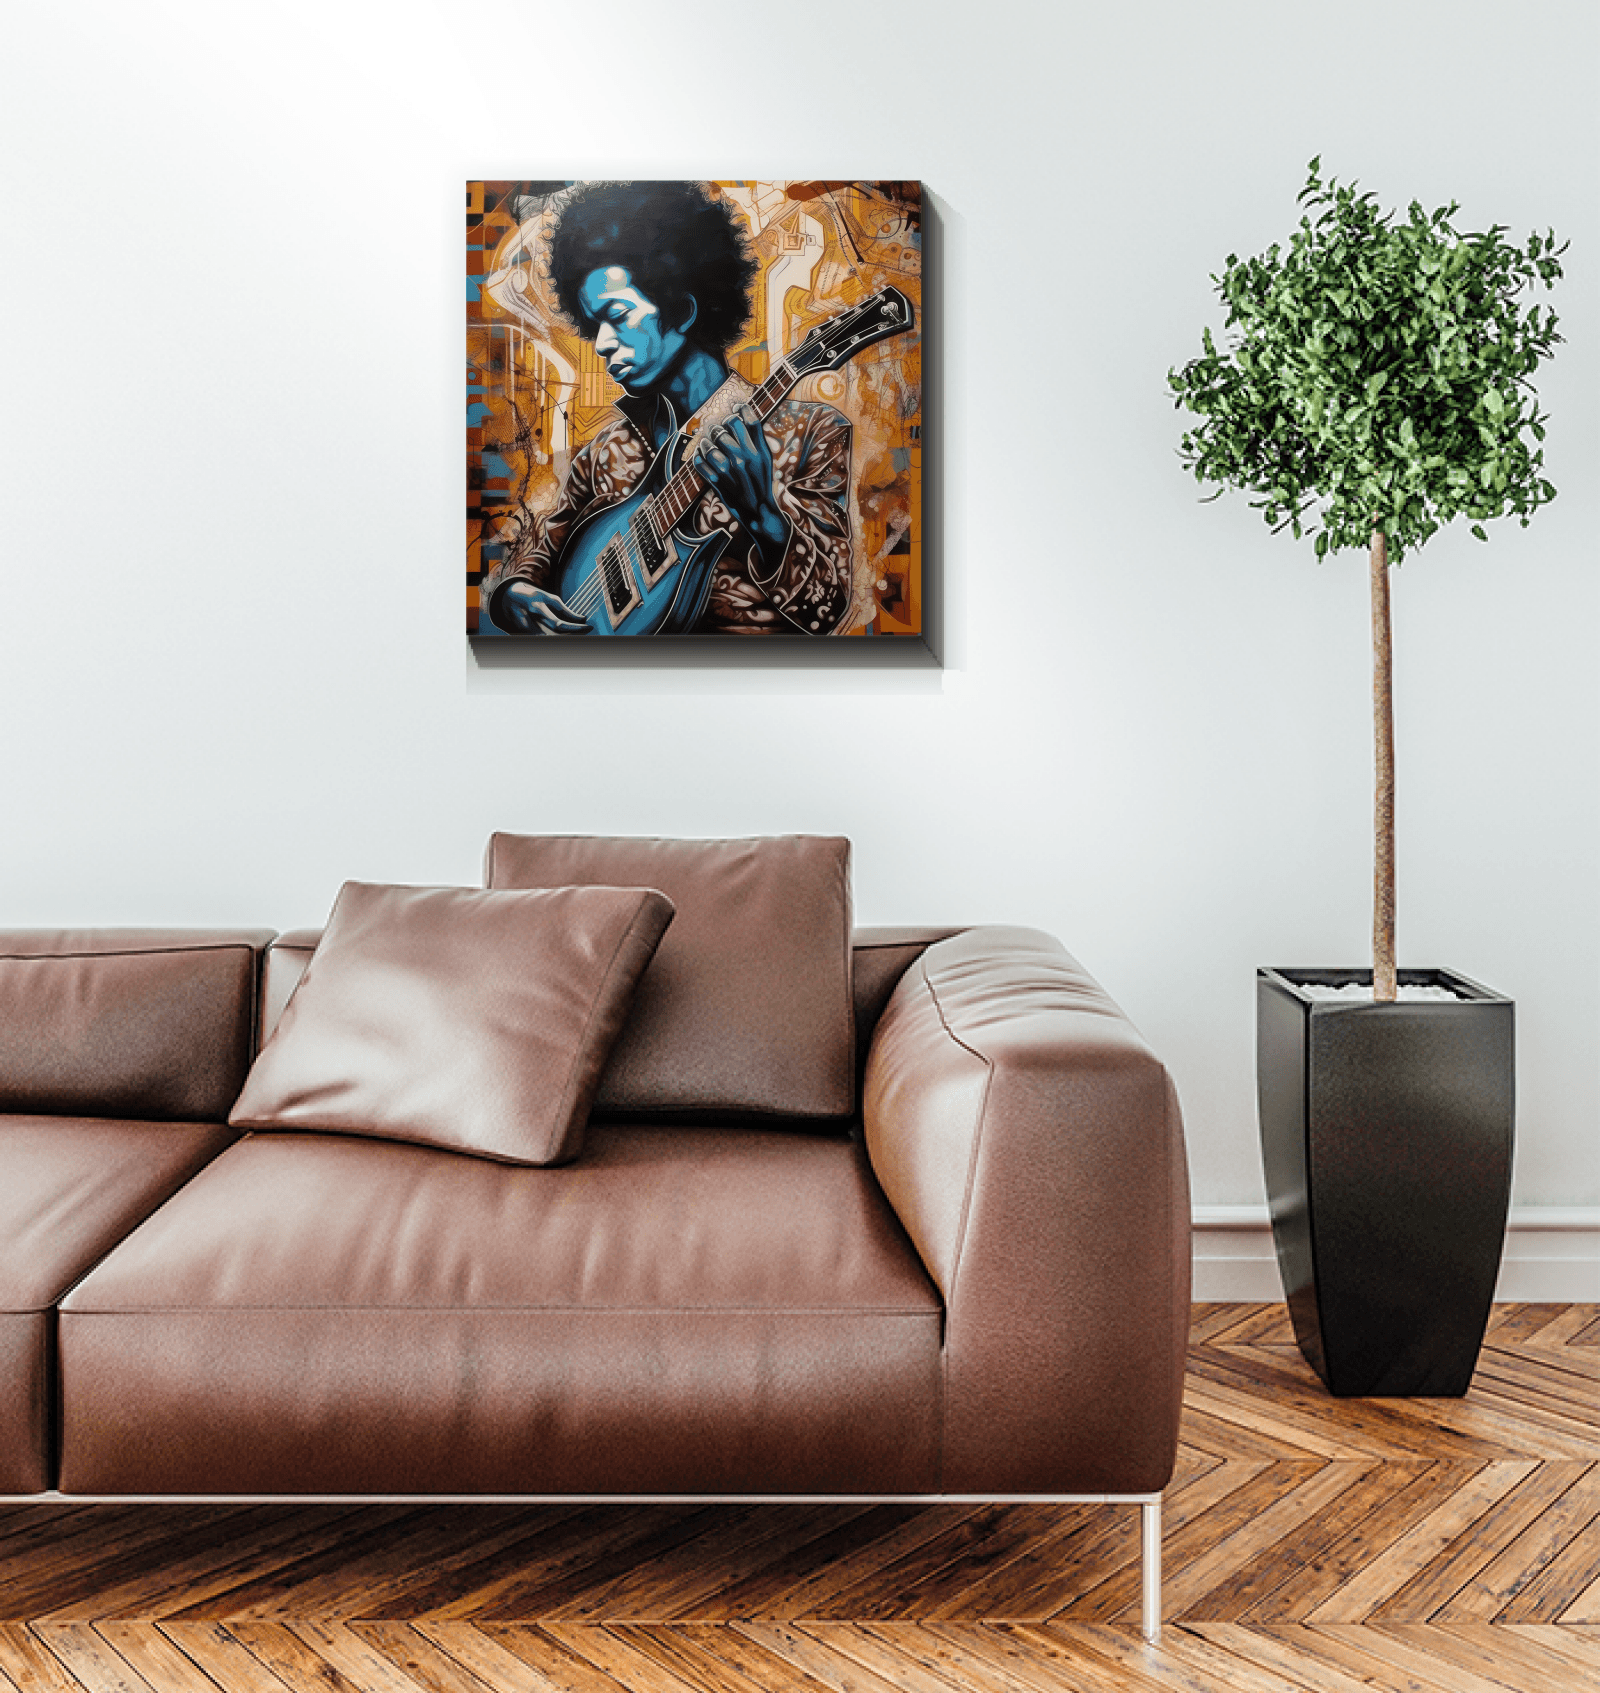 Artistic wrapped canvas featuring inspirational musicians.